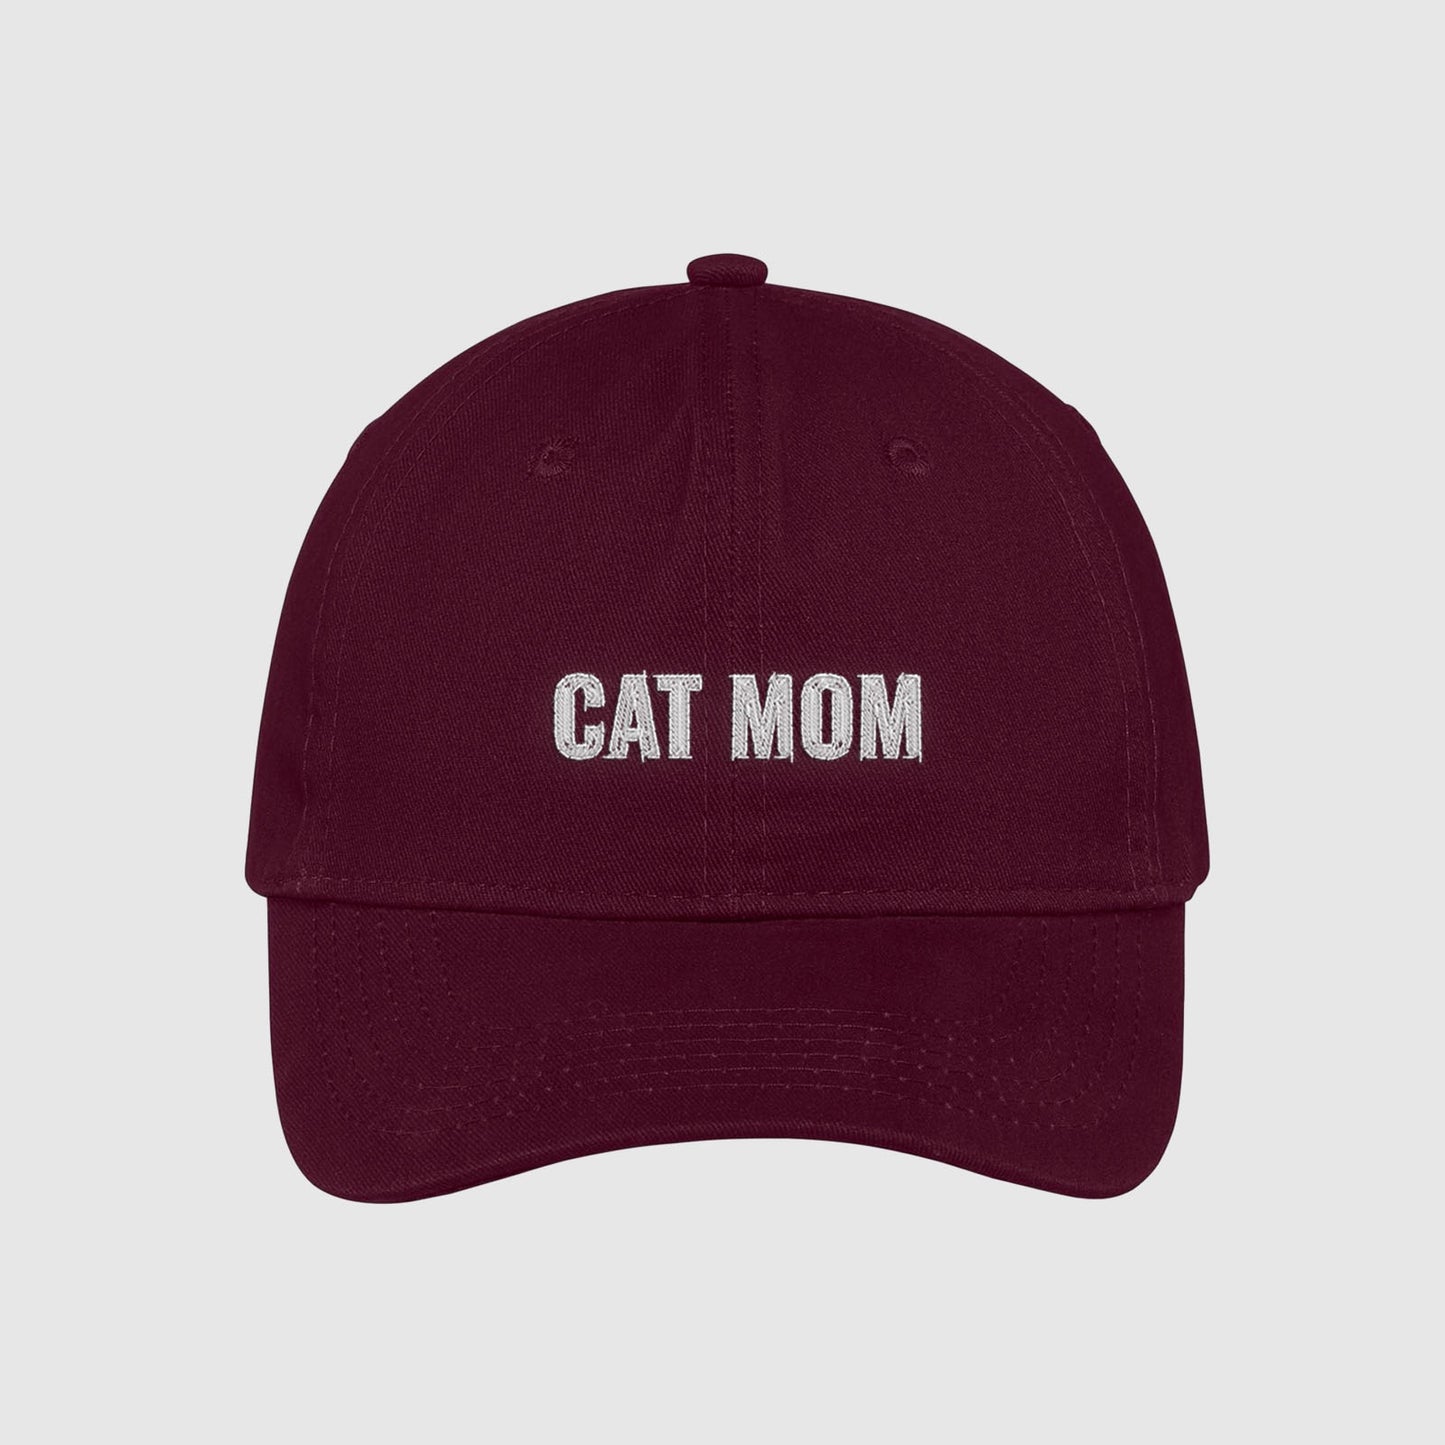 Maroon Cat Mom Hat embroidered with white text